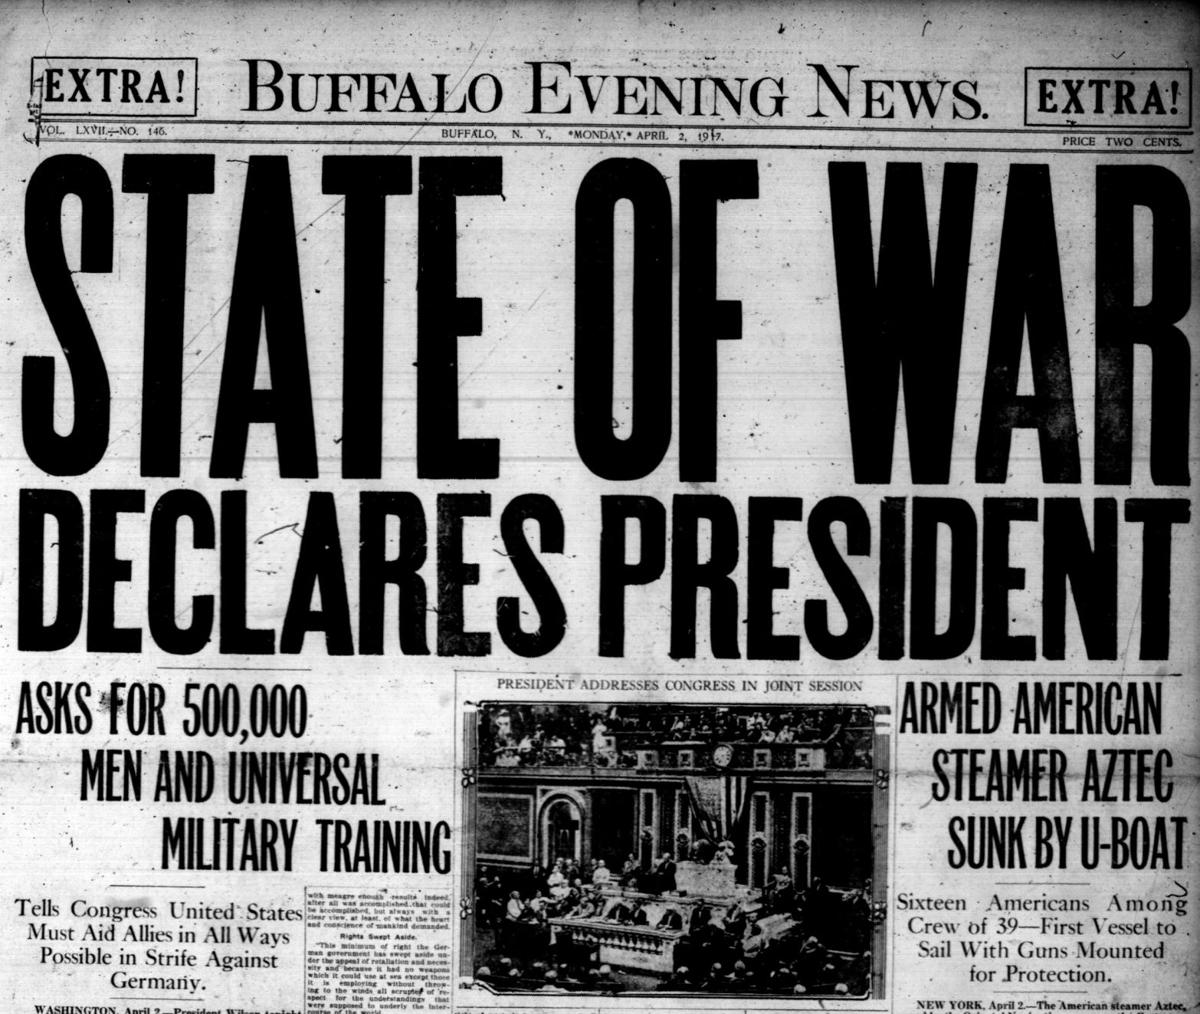 Front page, April 2, 1917: President Wilson declares war on Germany